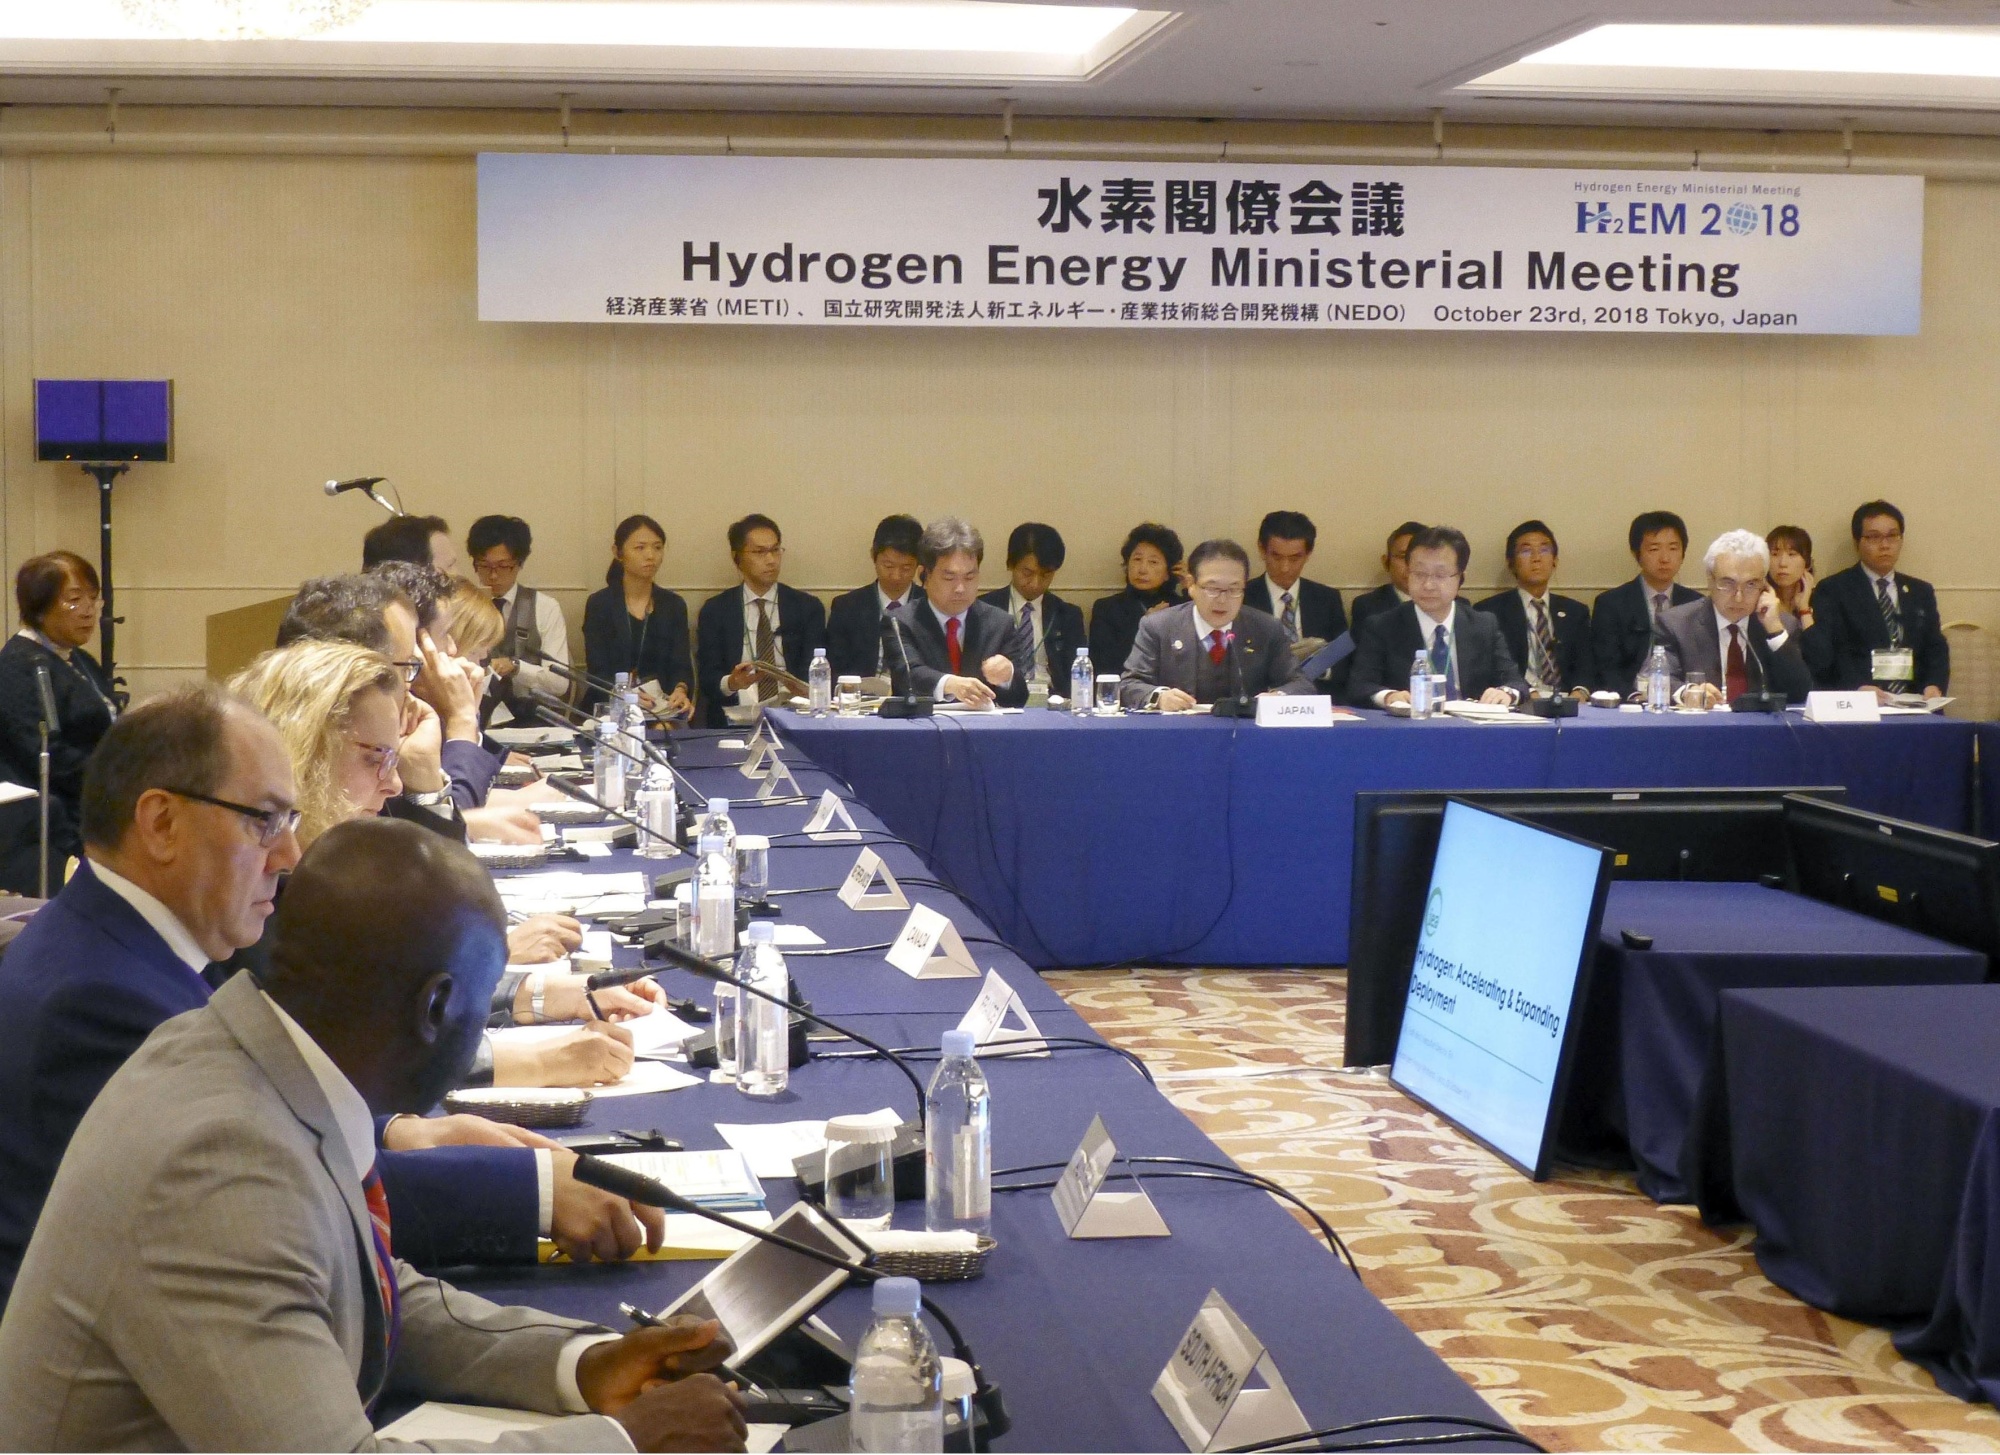 Ministers and other officials from around 20 nations hold the Hydrogen Energy Ministerial Meeting in Tokyo on Tuesday. | KYODO